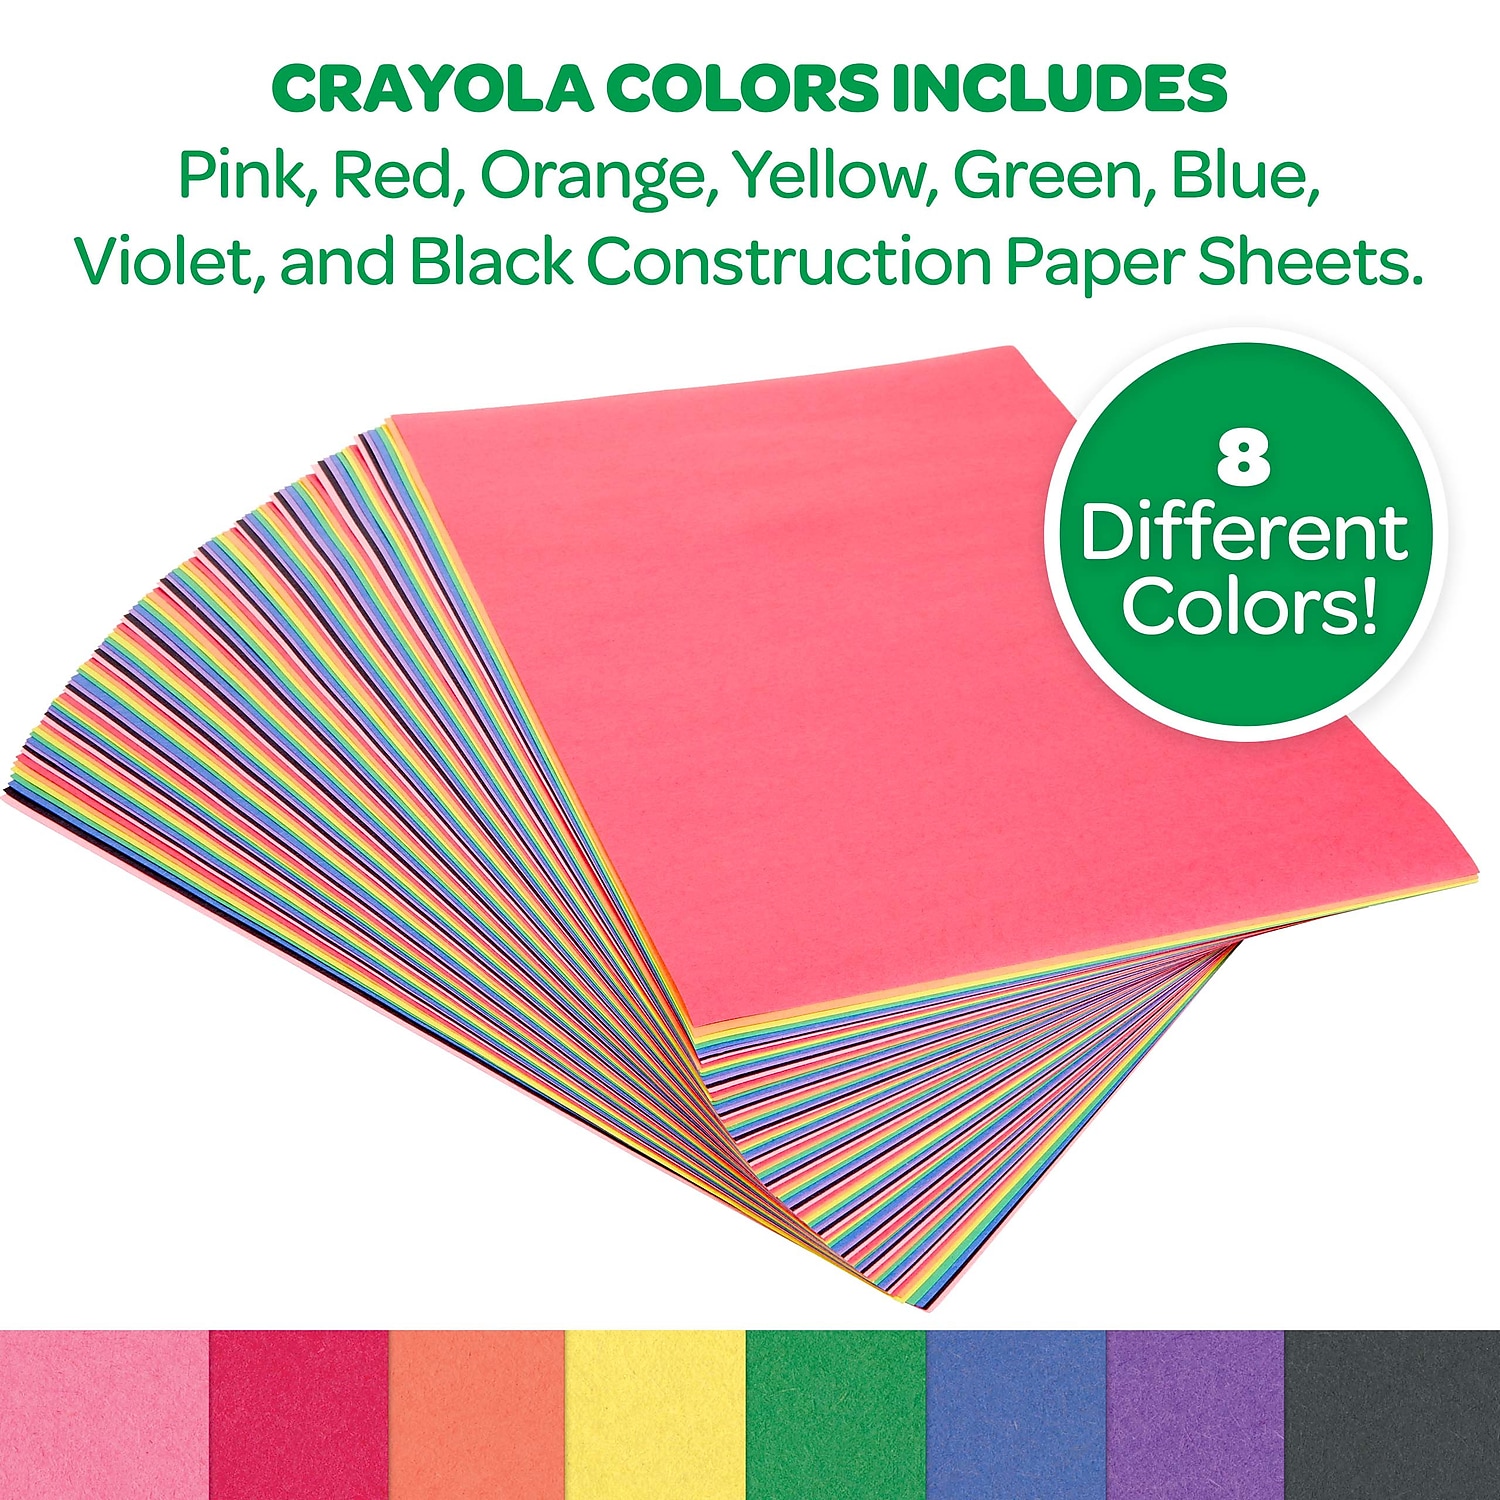 Crayola 96 Count Construction Paper Great for Crafting Projects - image 5 of 7